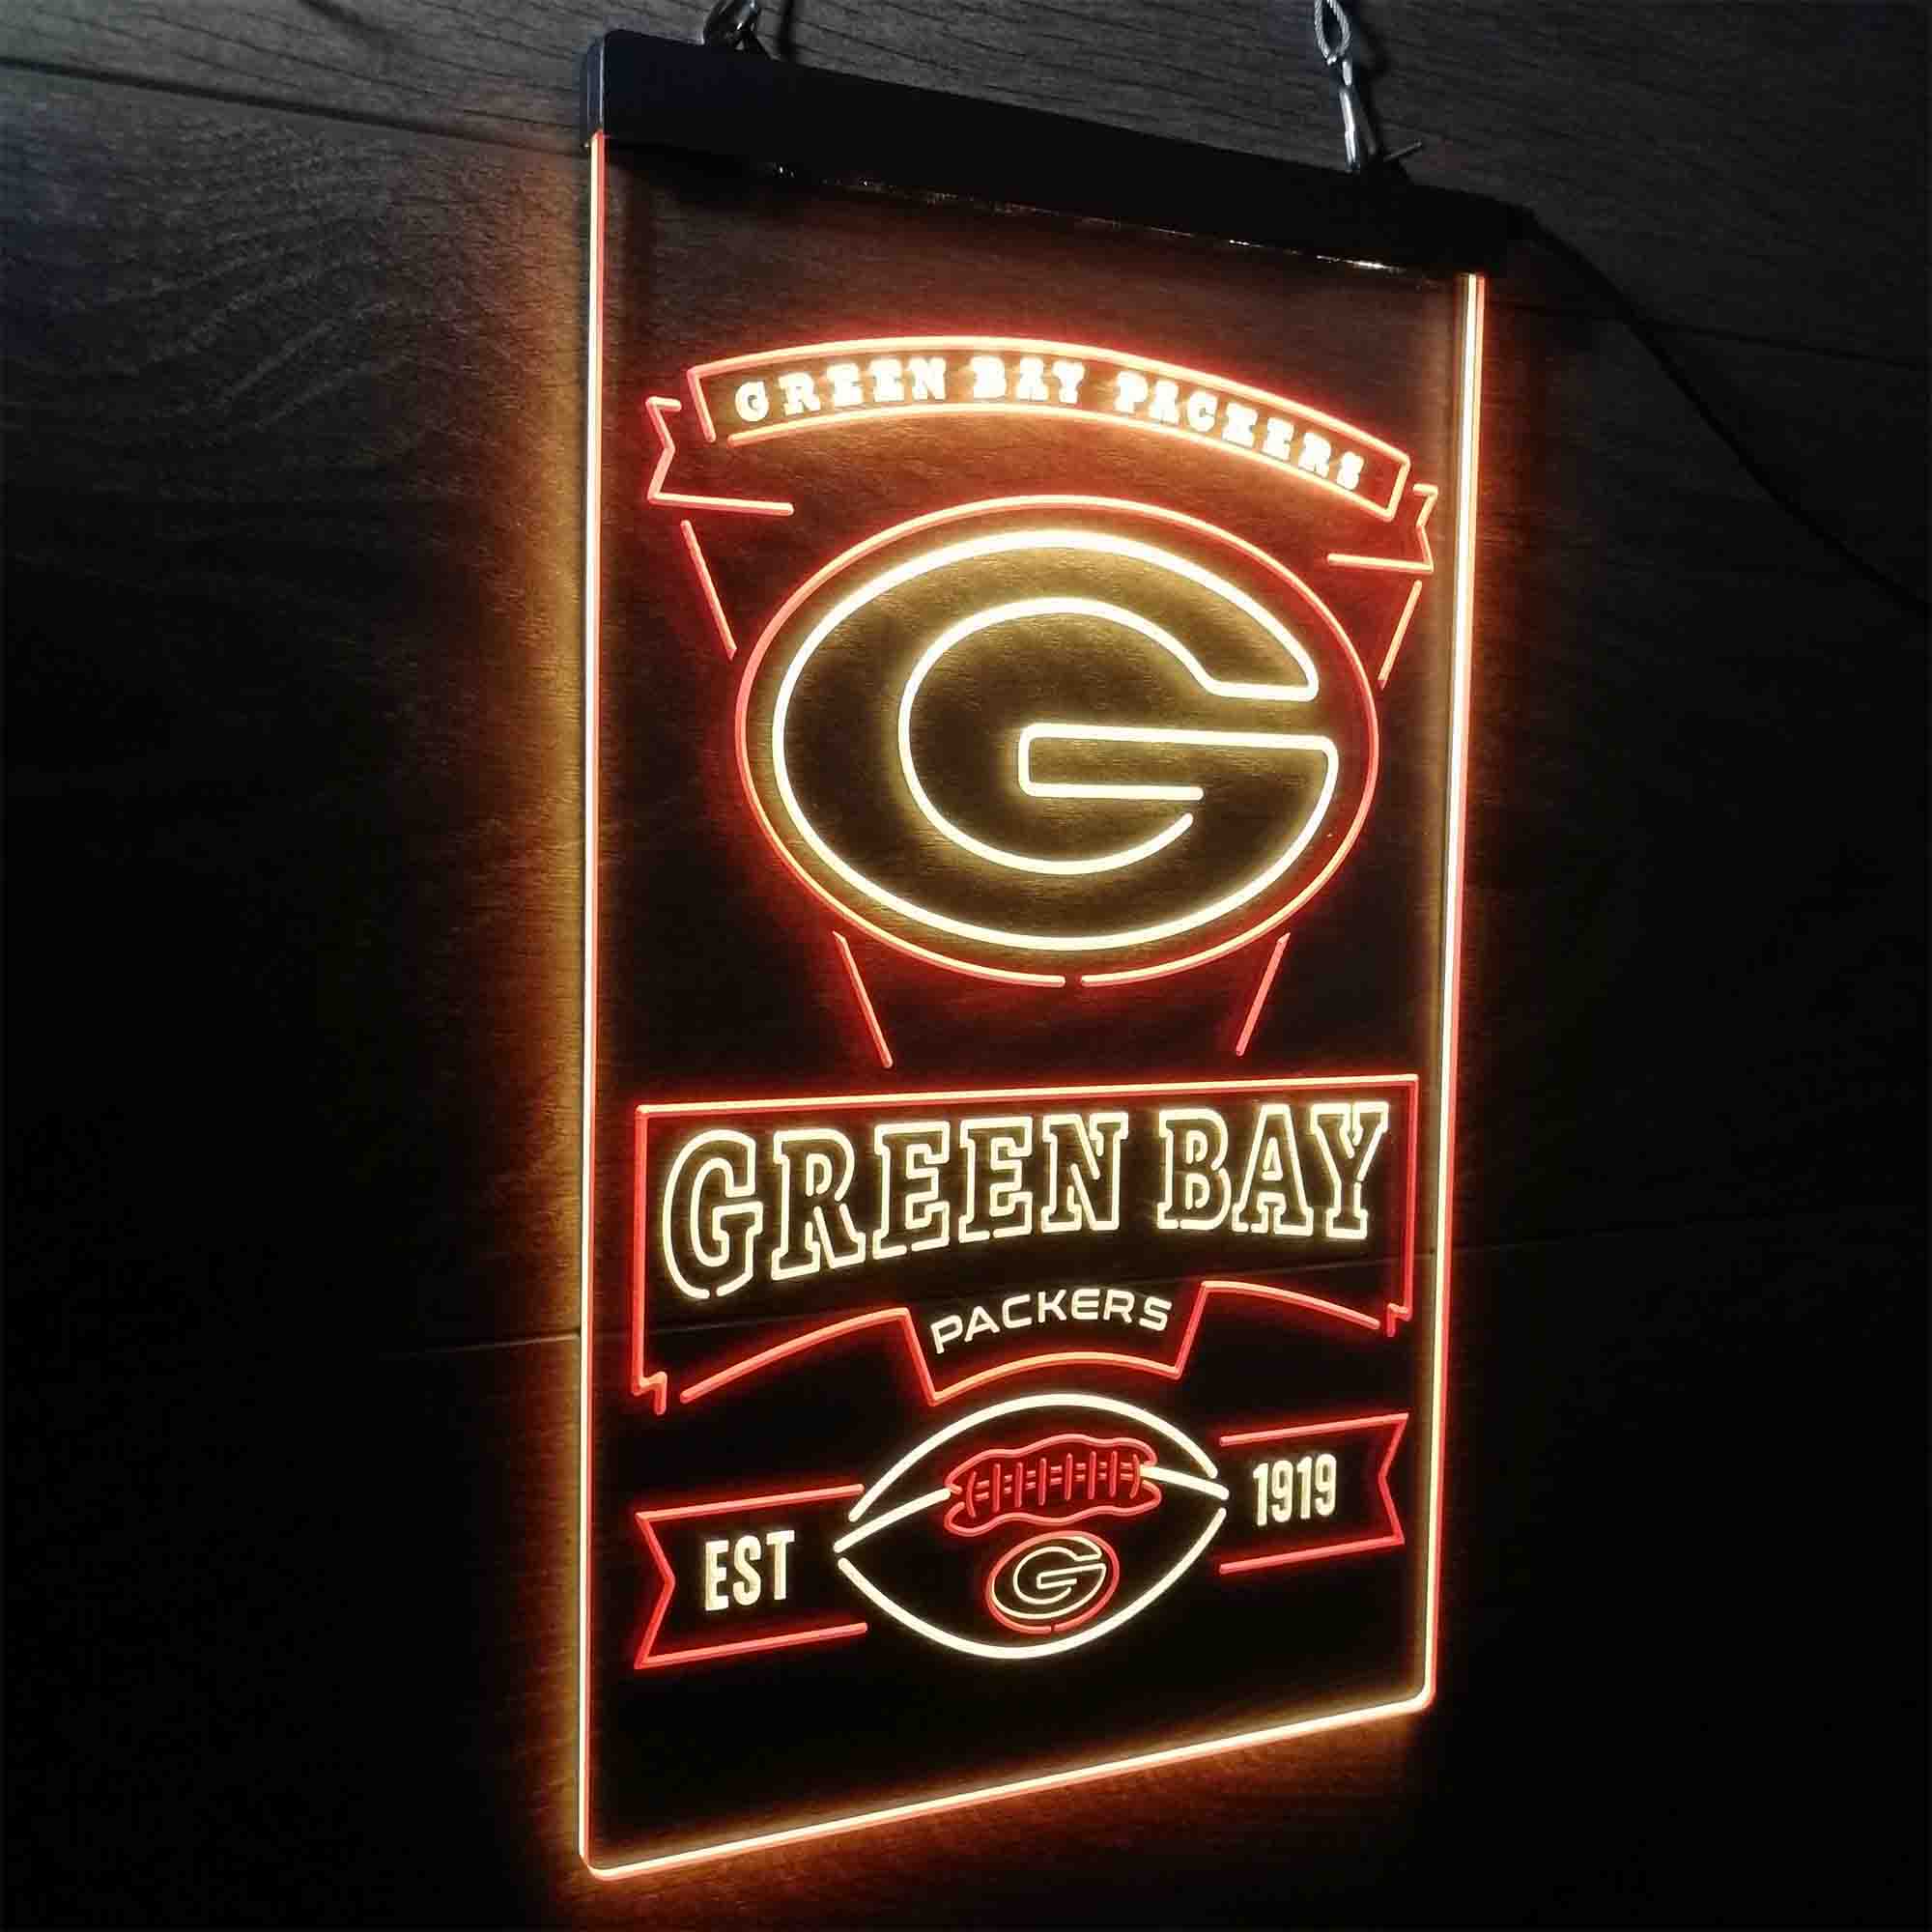 Green Bay Packers Memorabilia Neon LED Sign - Limited Edition